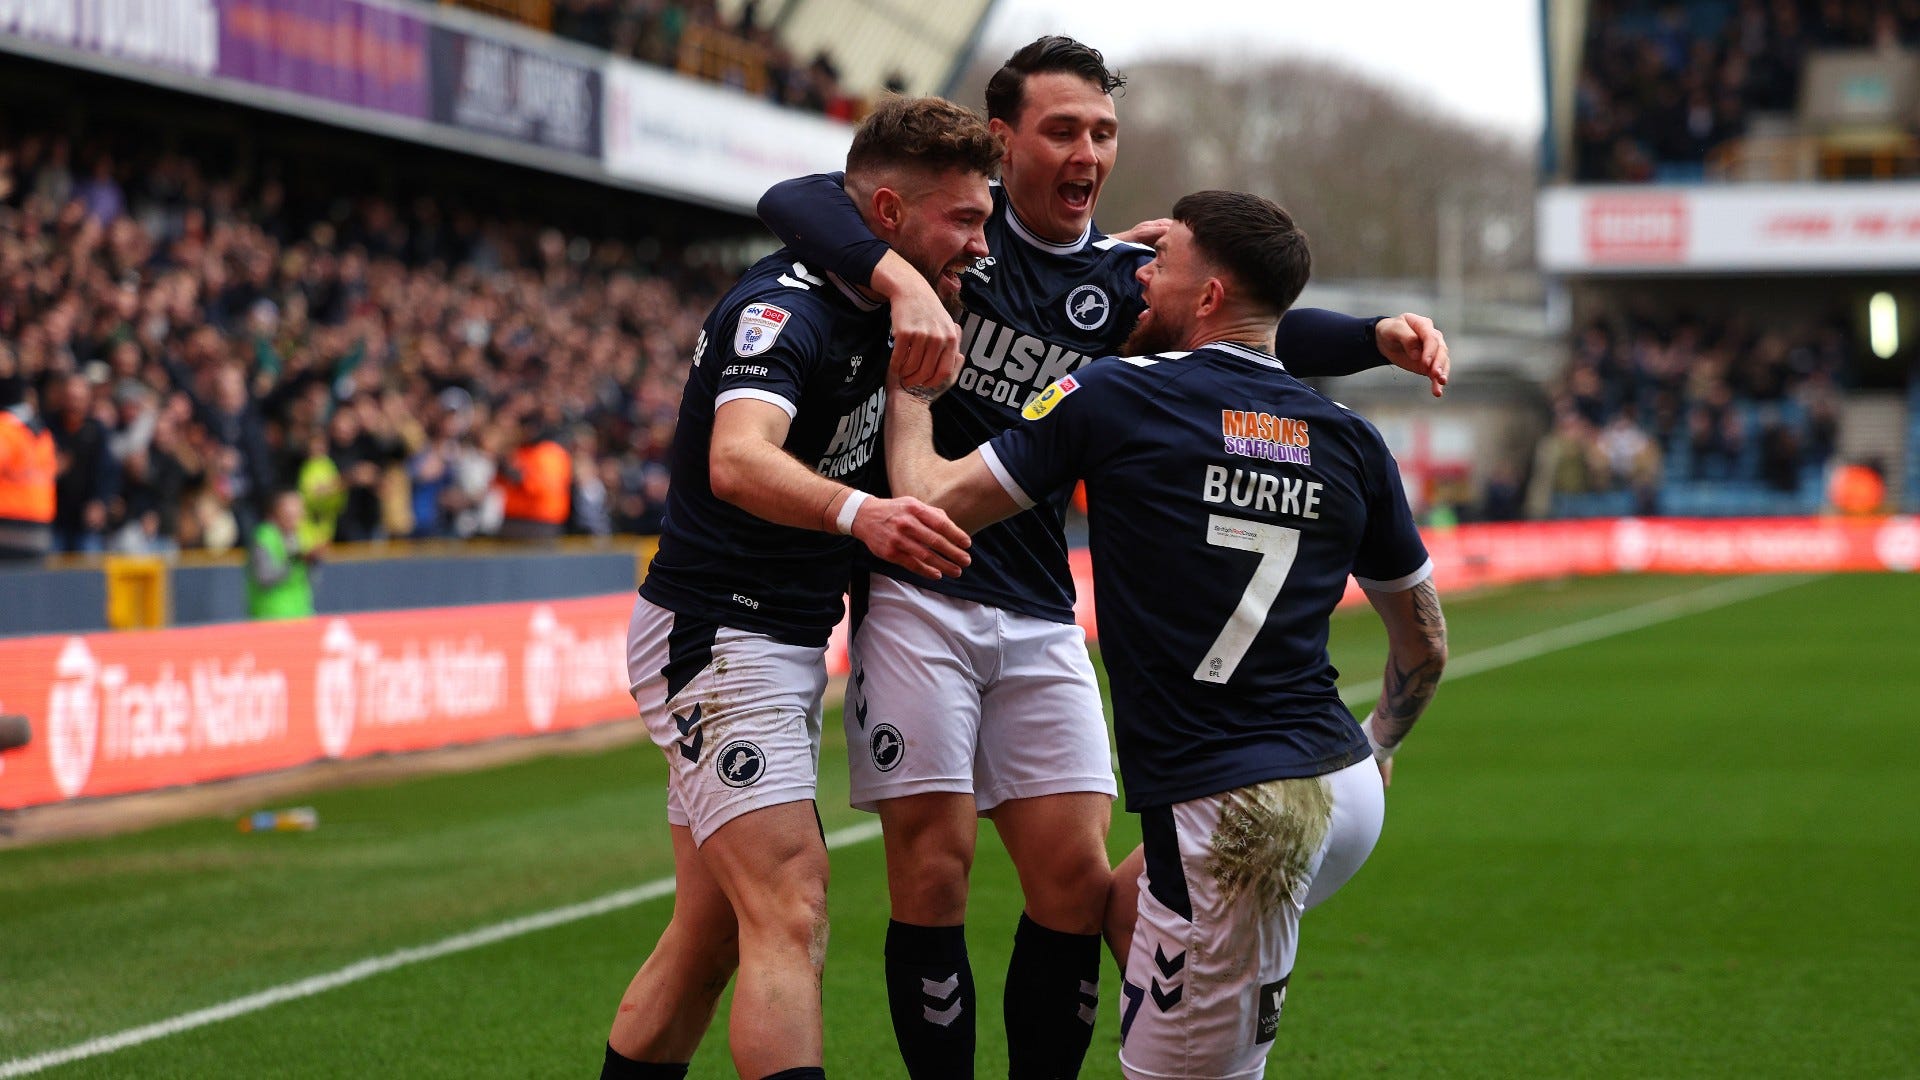 Millwall vs Blackburn Rovers Where to watch the match online, live stream, TV channels and kick-off time Goal UK